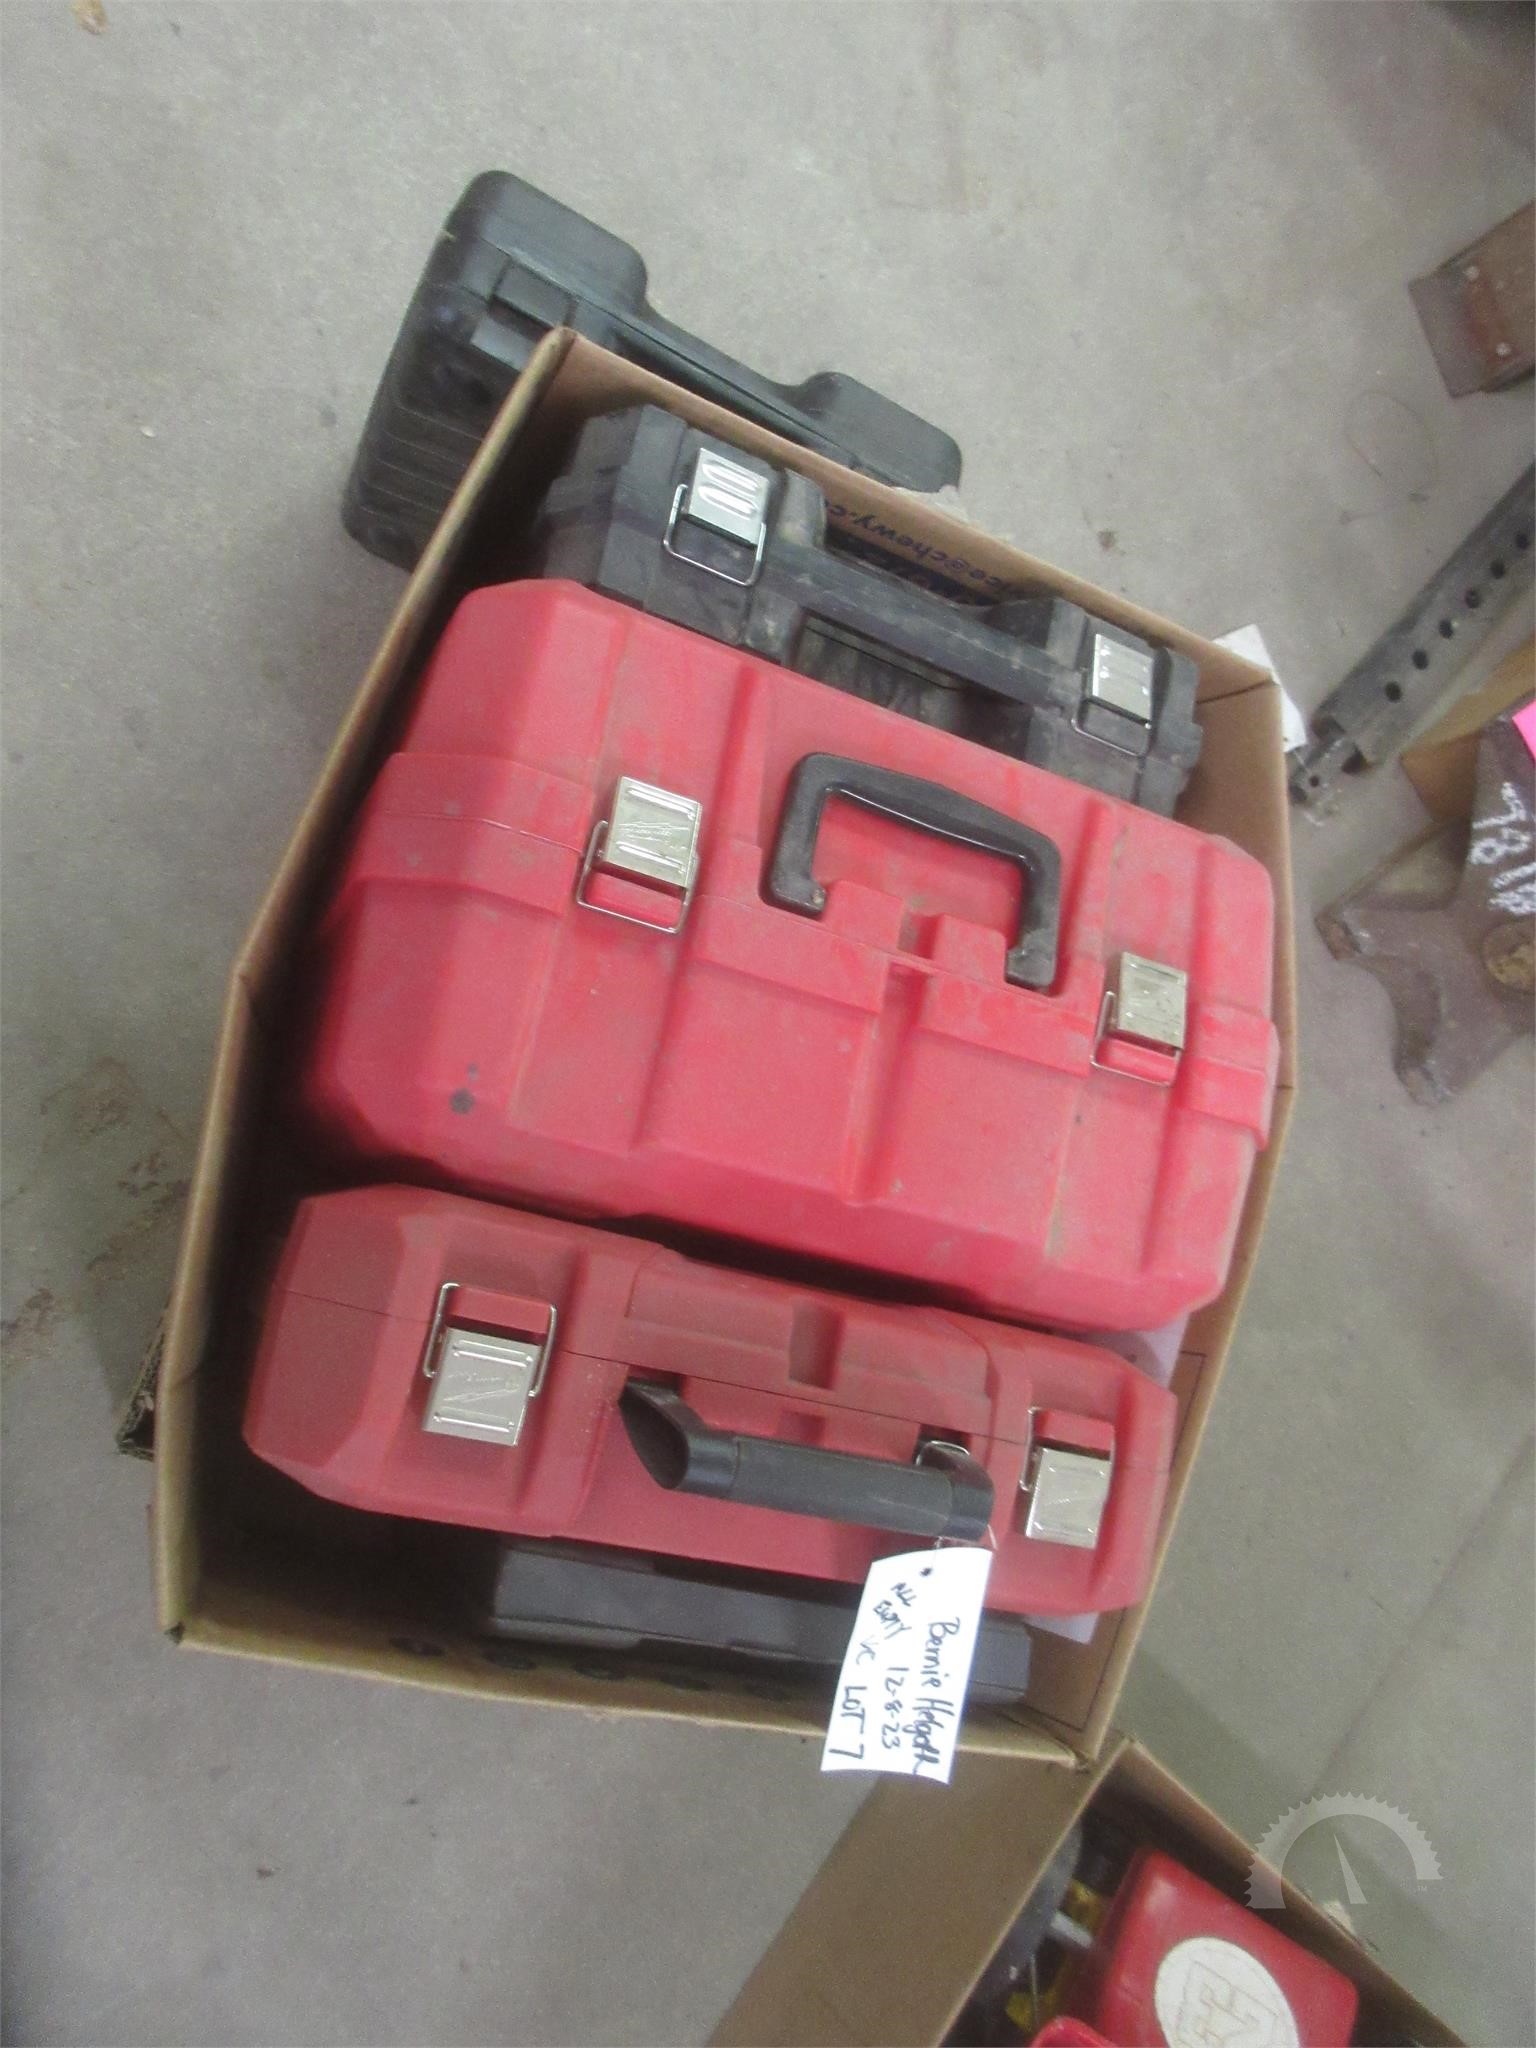 Tray of Tools, Husky Bag and Snap-On Bag - Roller Auctions